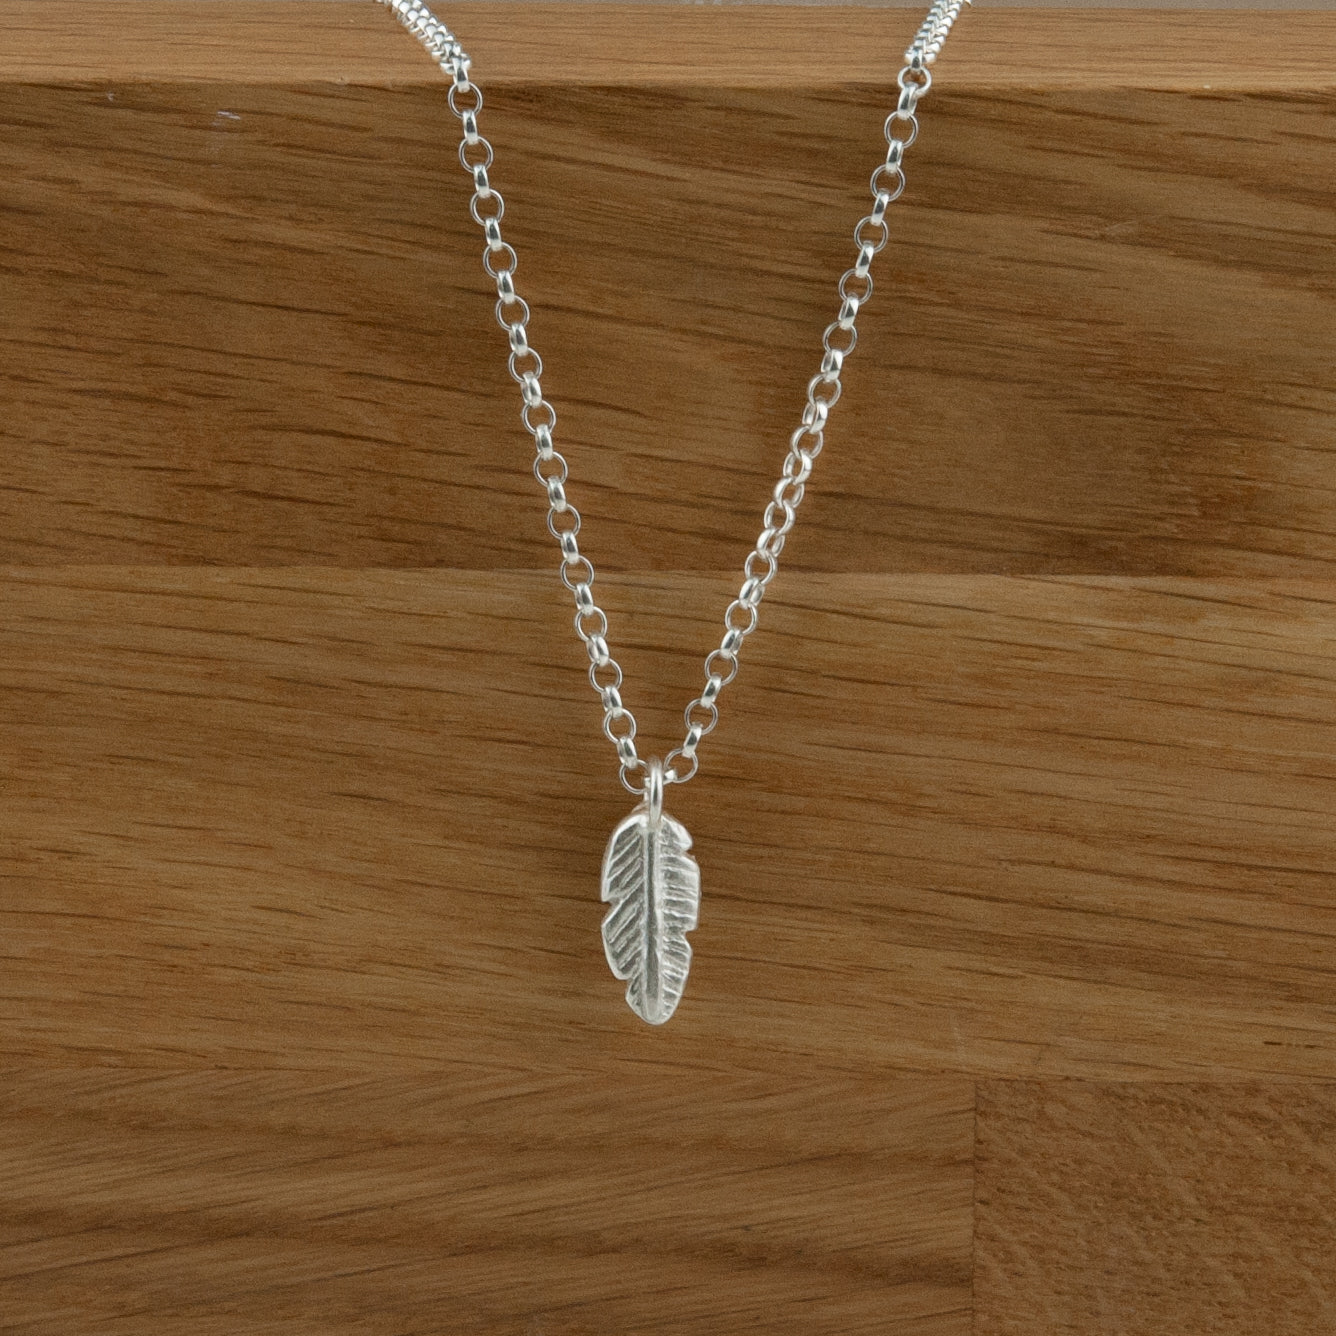 Belle & Bee sterling silver feather necklace